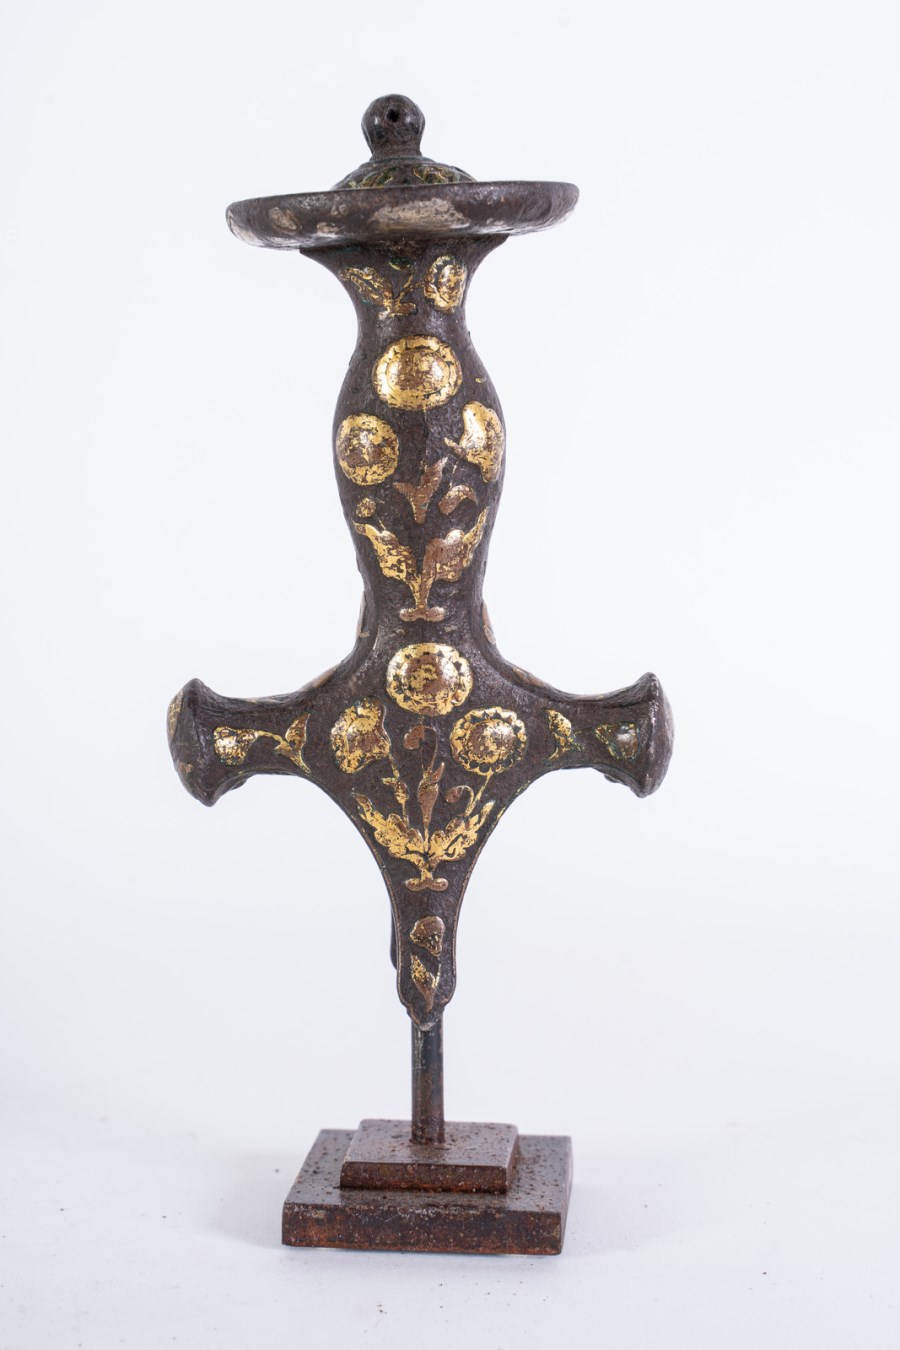 An iron talwar handle highlighted with gilded flowers
Southern India, 18th century  (Arte Islamica )